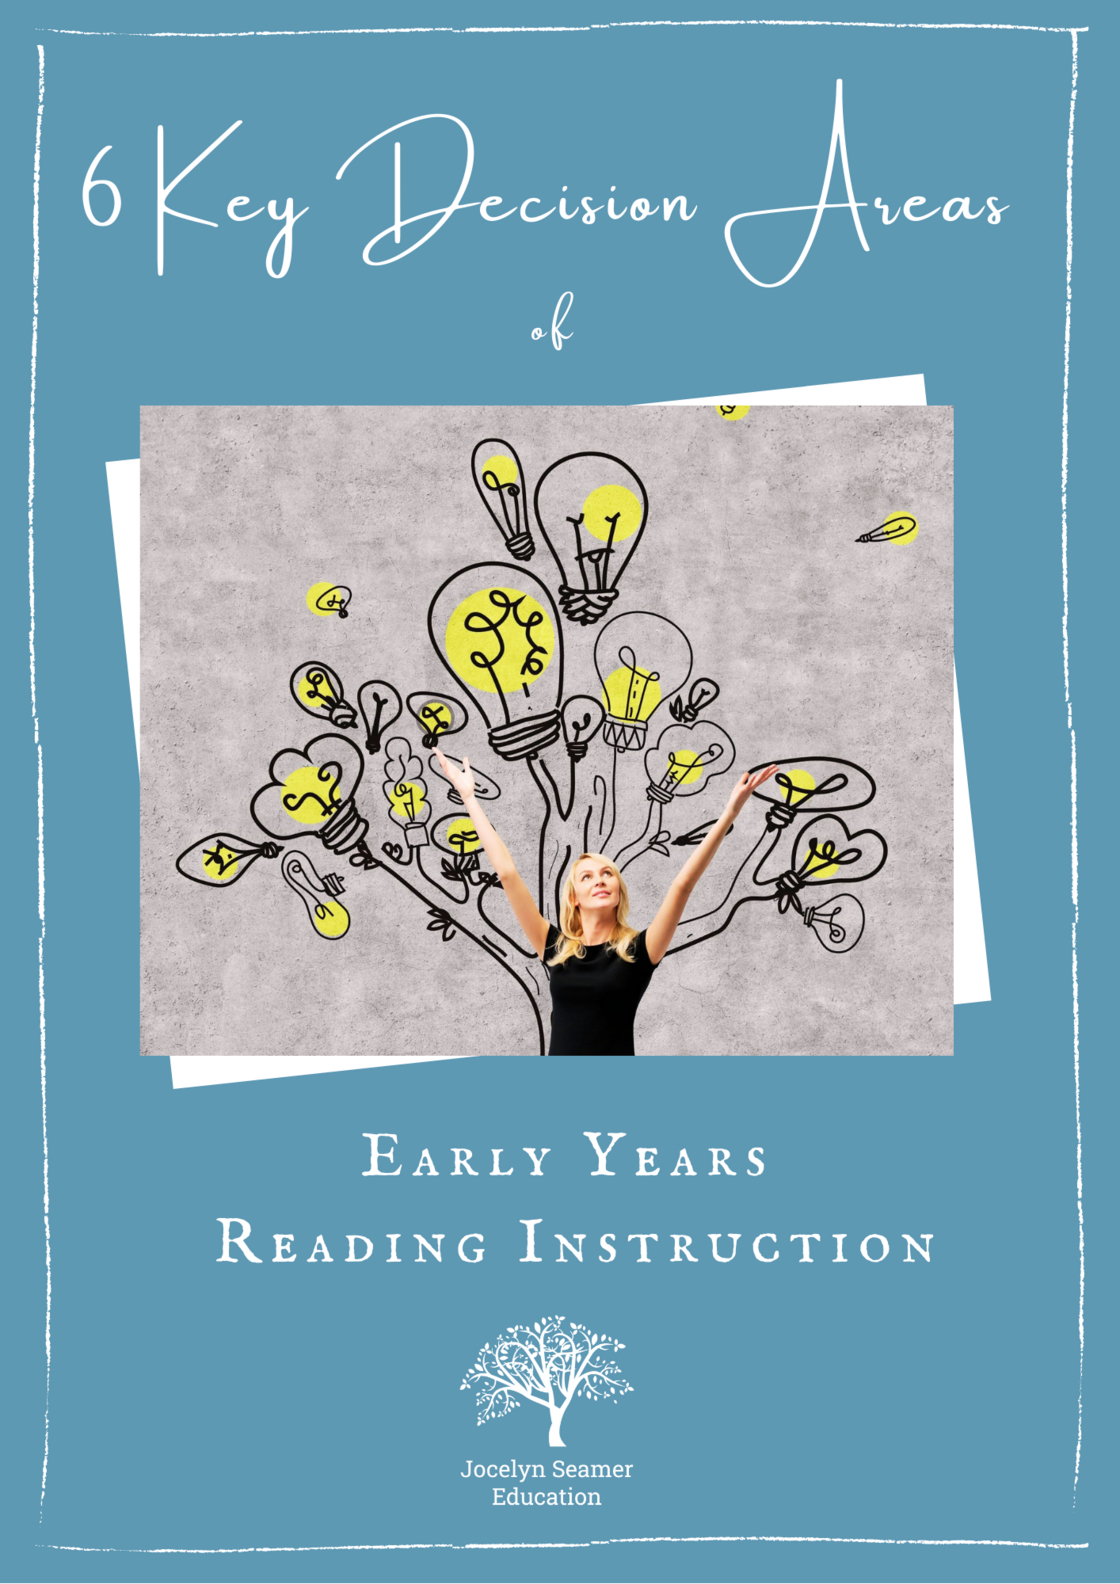 6 Key Decisions of Early Years Reading Instruction